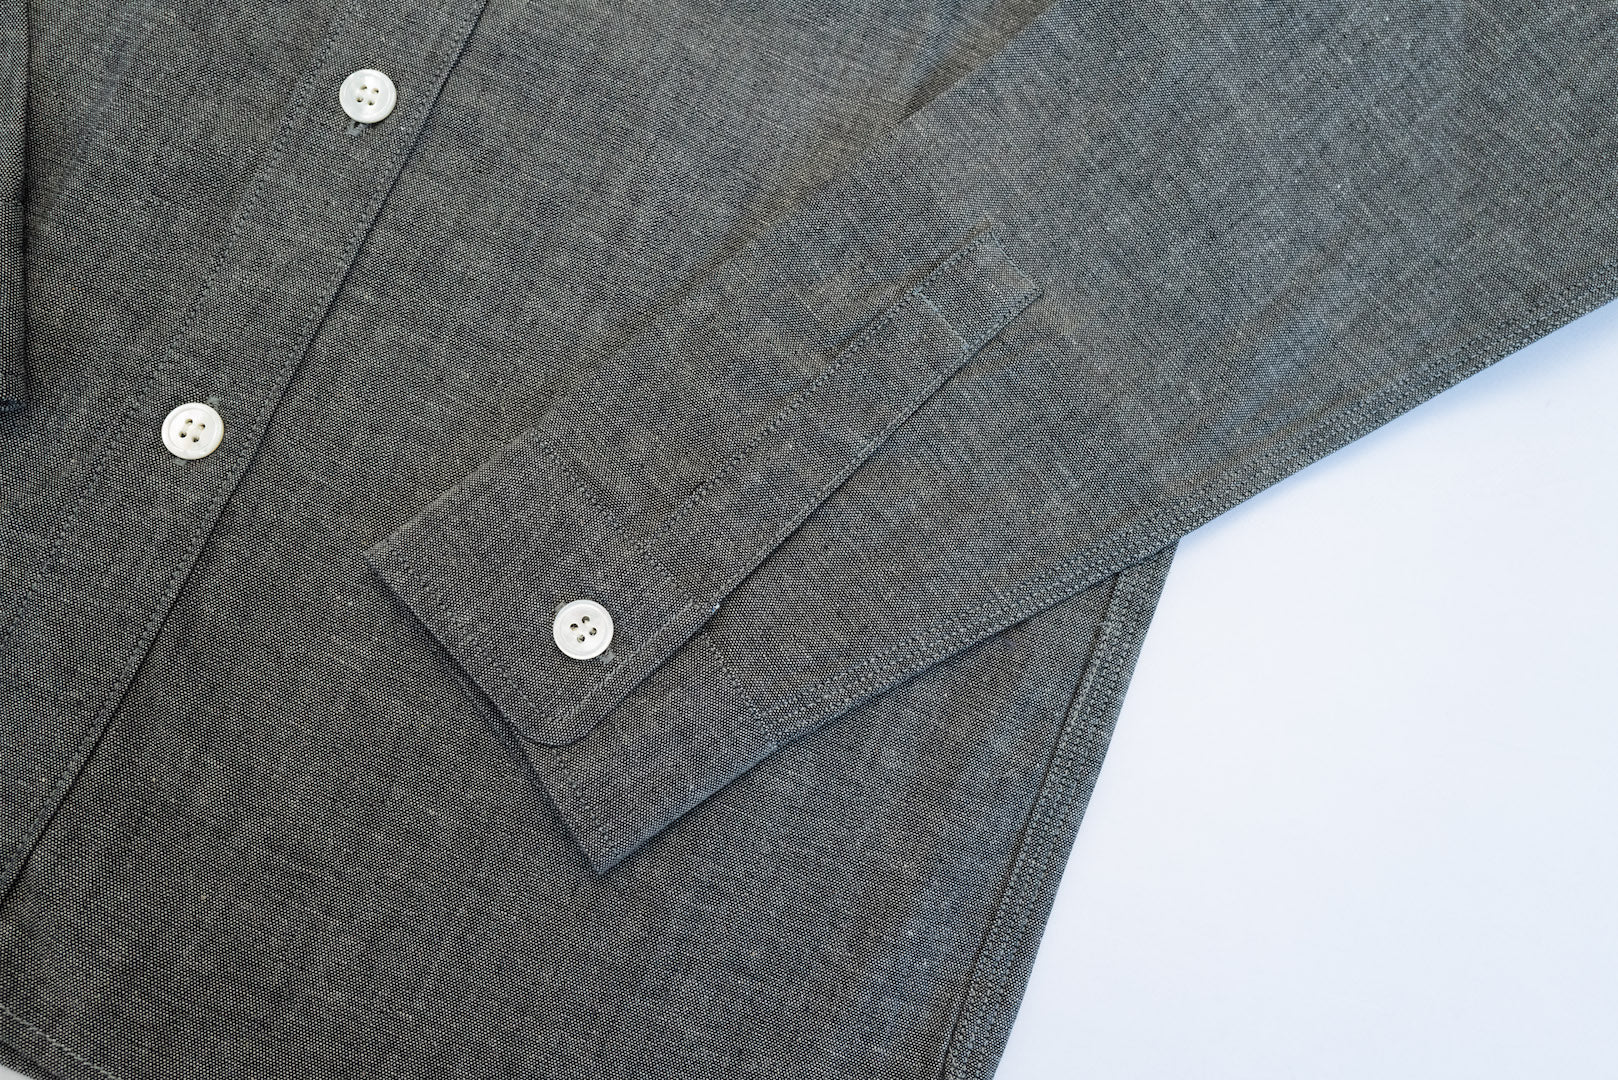 Unique Garment 9oz 'Stanley' Selvage Chambray Work Shirt (Grey)